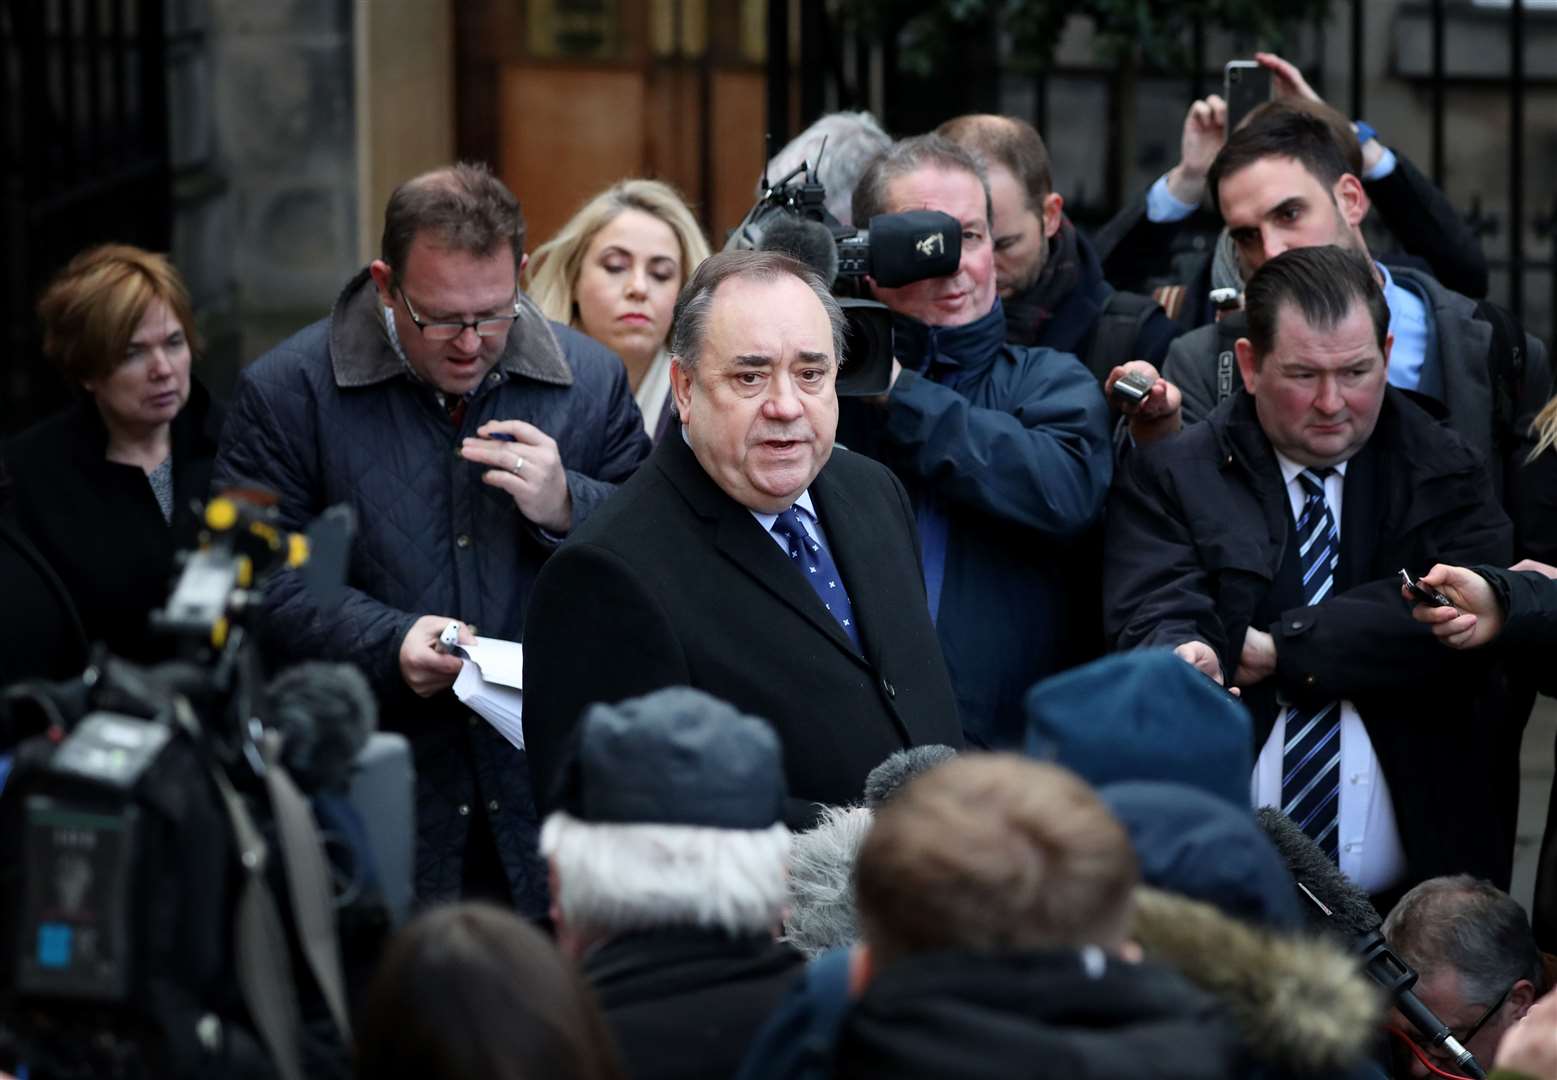 Alex Salmond speaking outside the Court of Session in Edinburgh after it ruled the Scottish Government acted unlawfully regarding sexual harassment complaints against him (Jane Barlow/PA)